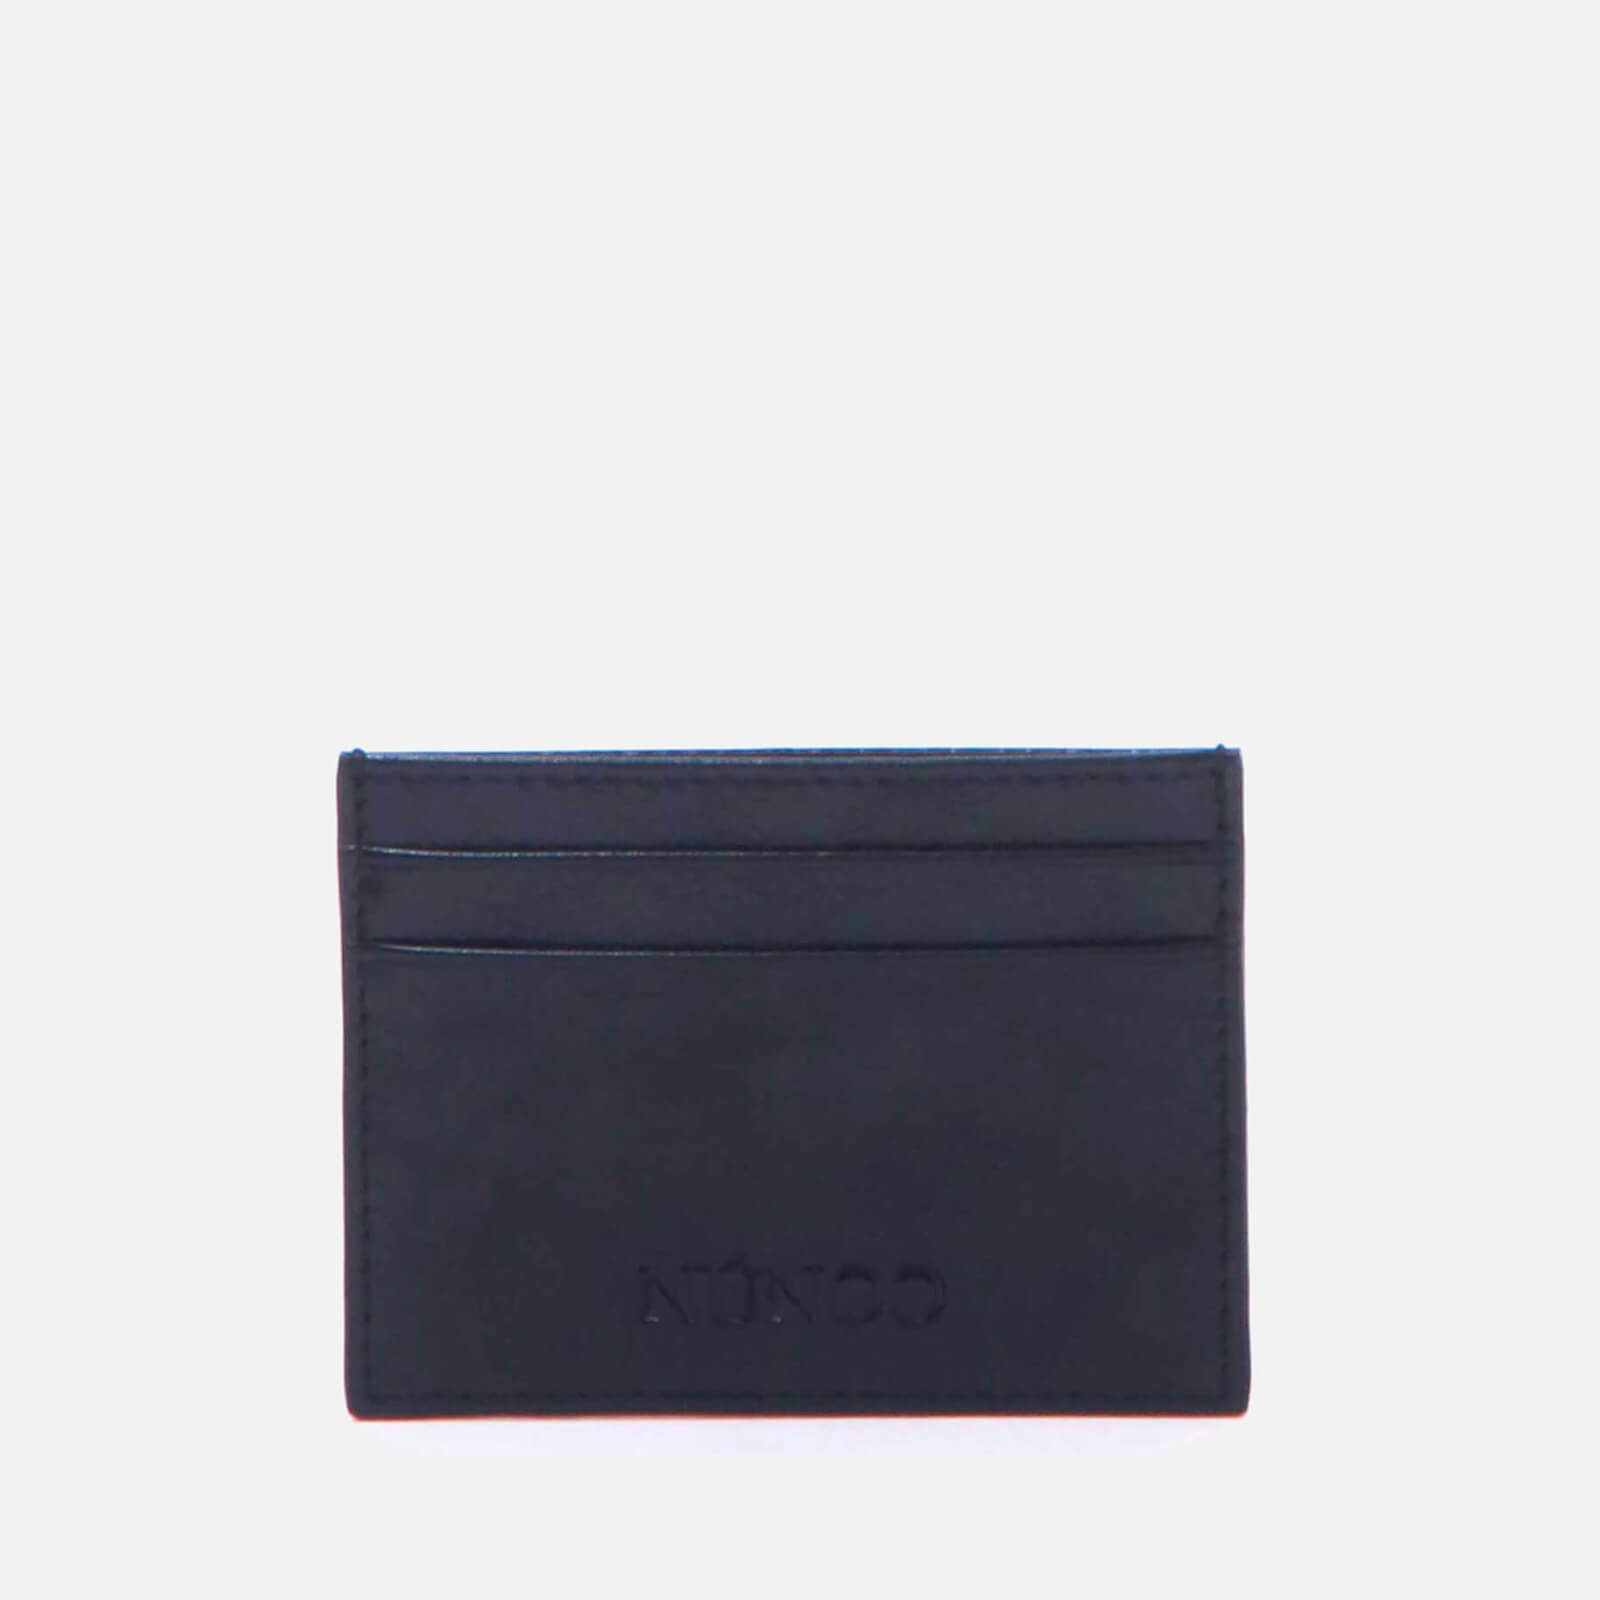 Image of Núnoo Pixie City Leather Cardholder